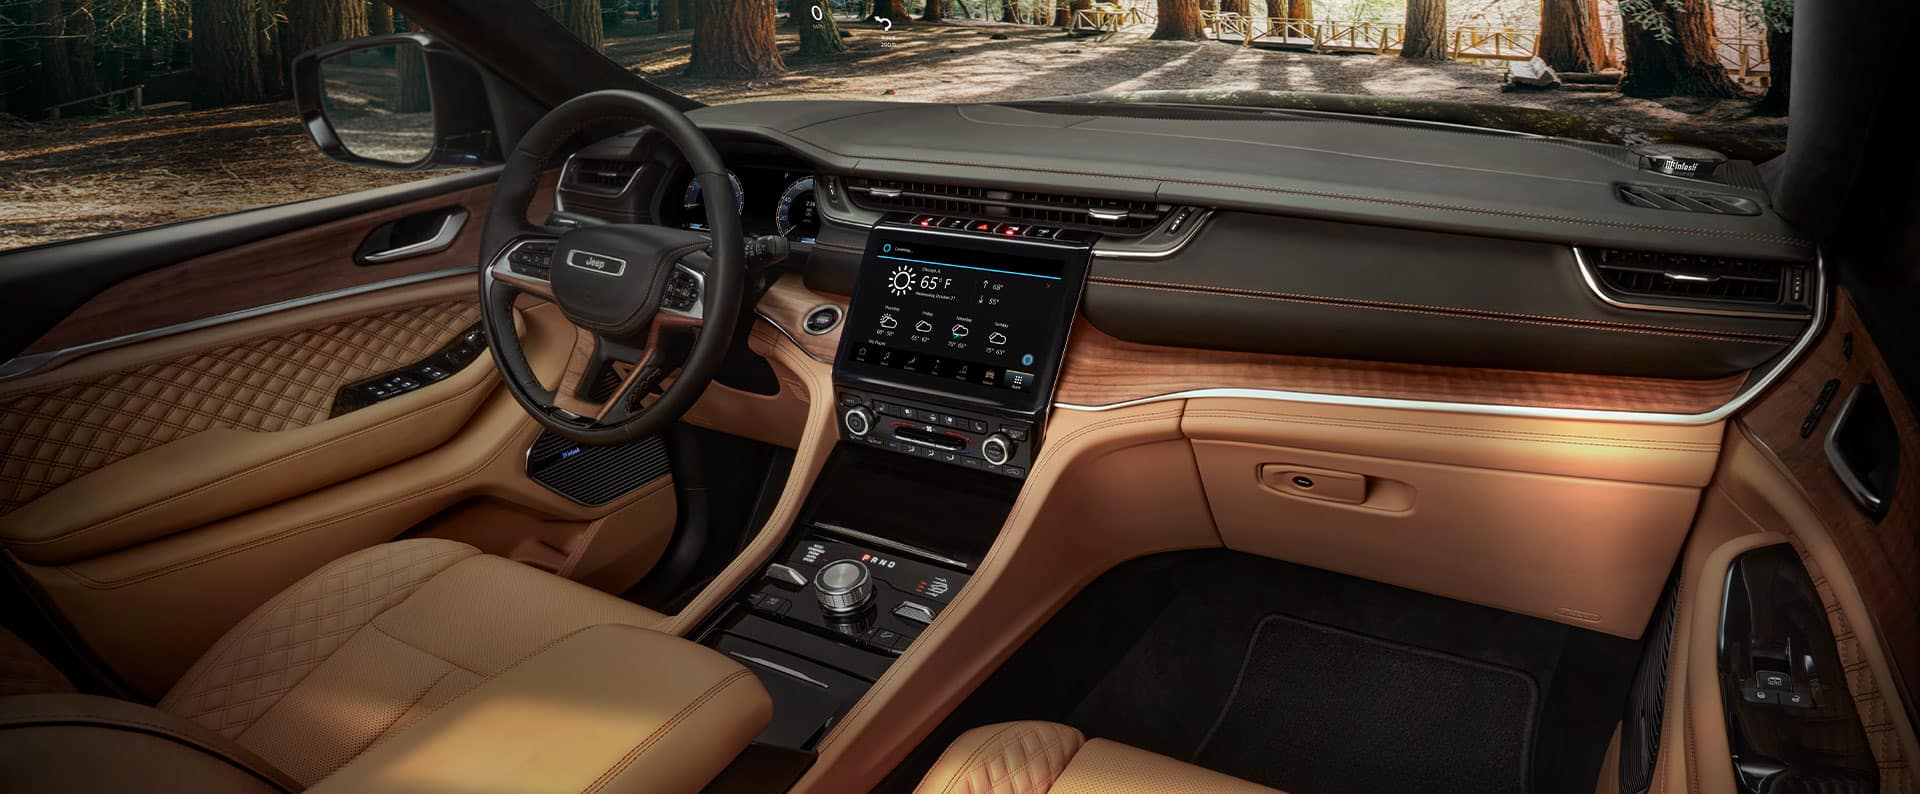 The interior of the 2021 Jeep Grand Cherokee L Summit Reserve, focusing on the front seats, entertainment center and dashboard.